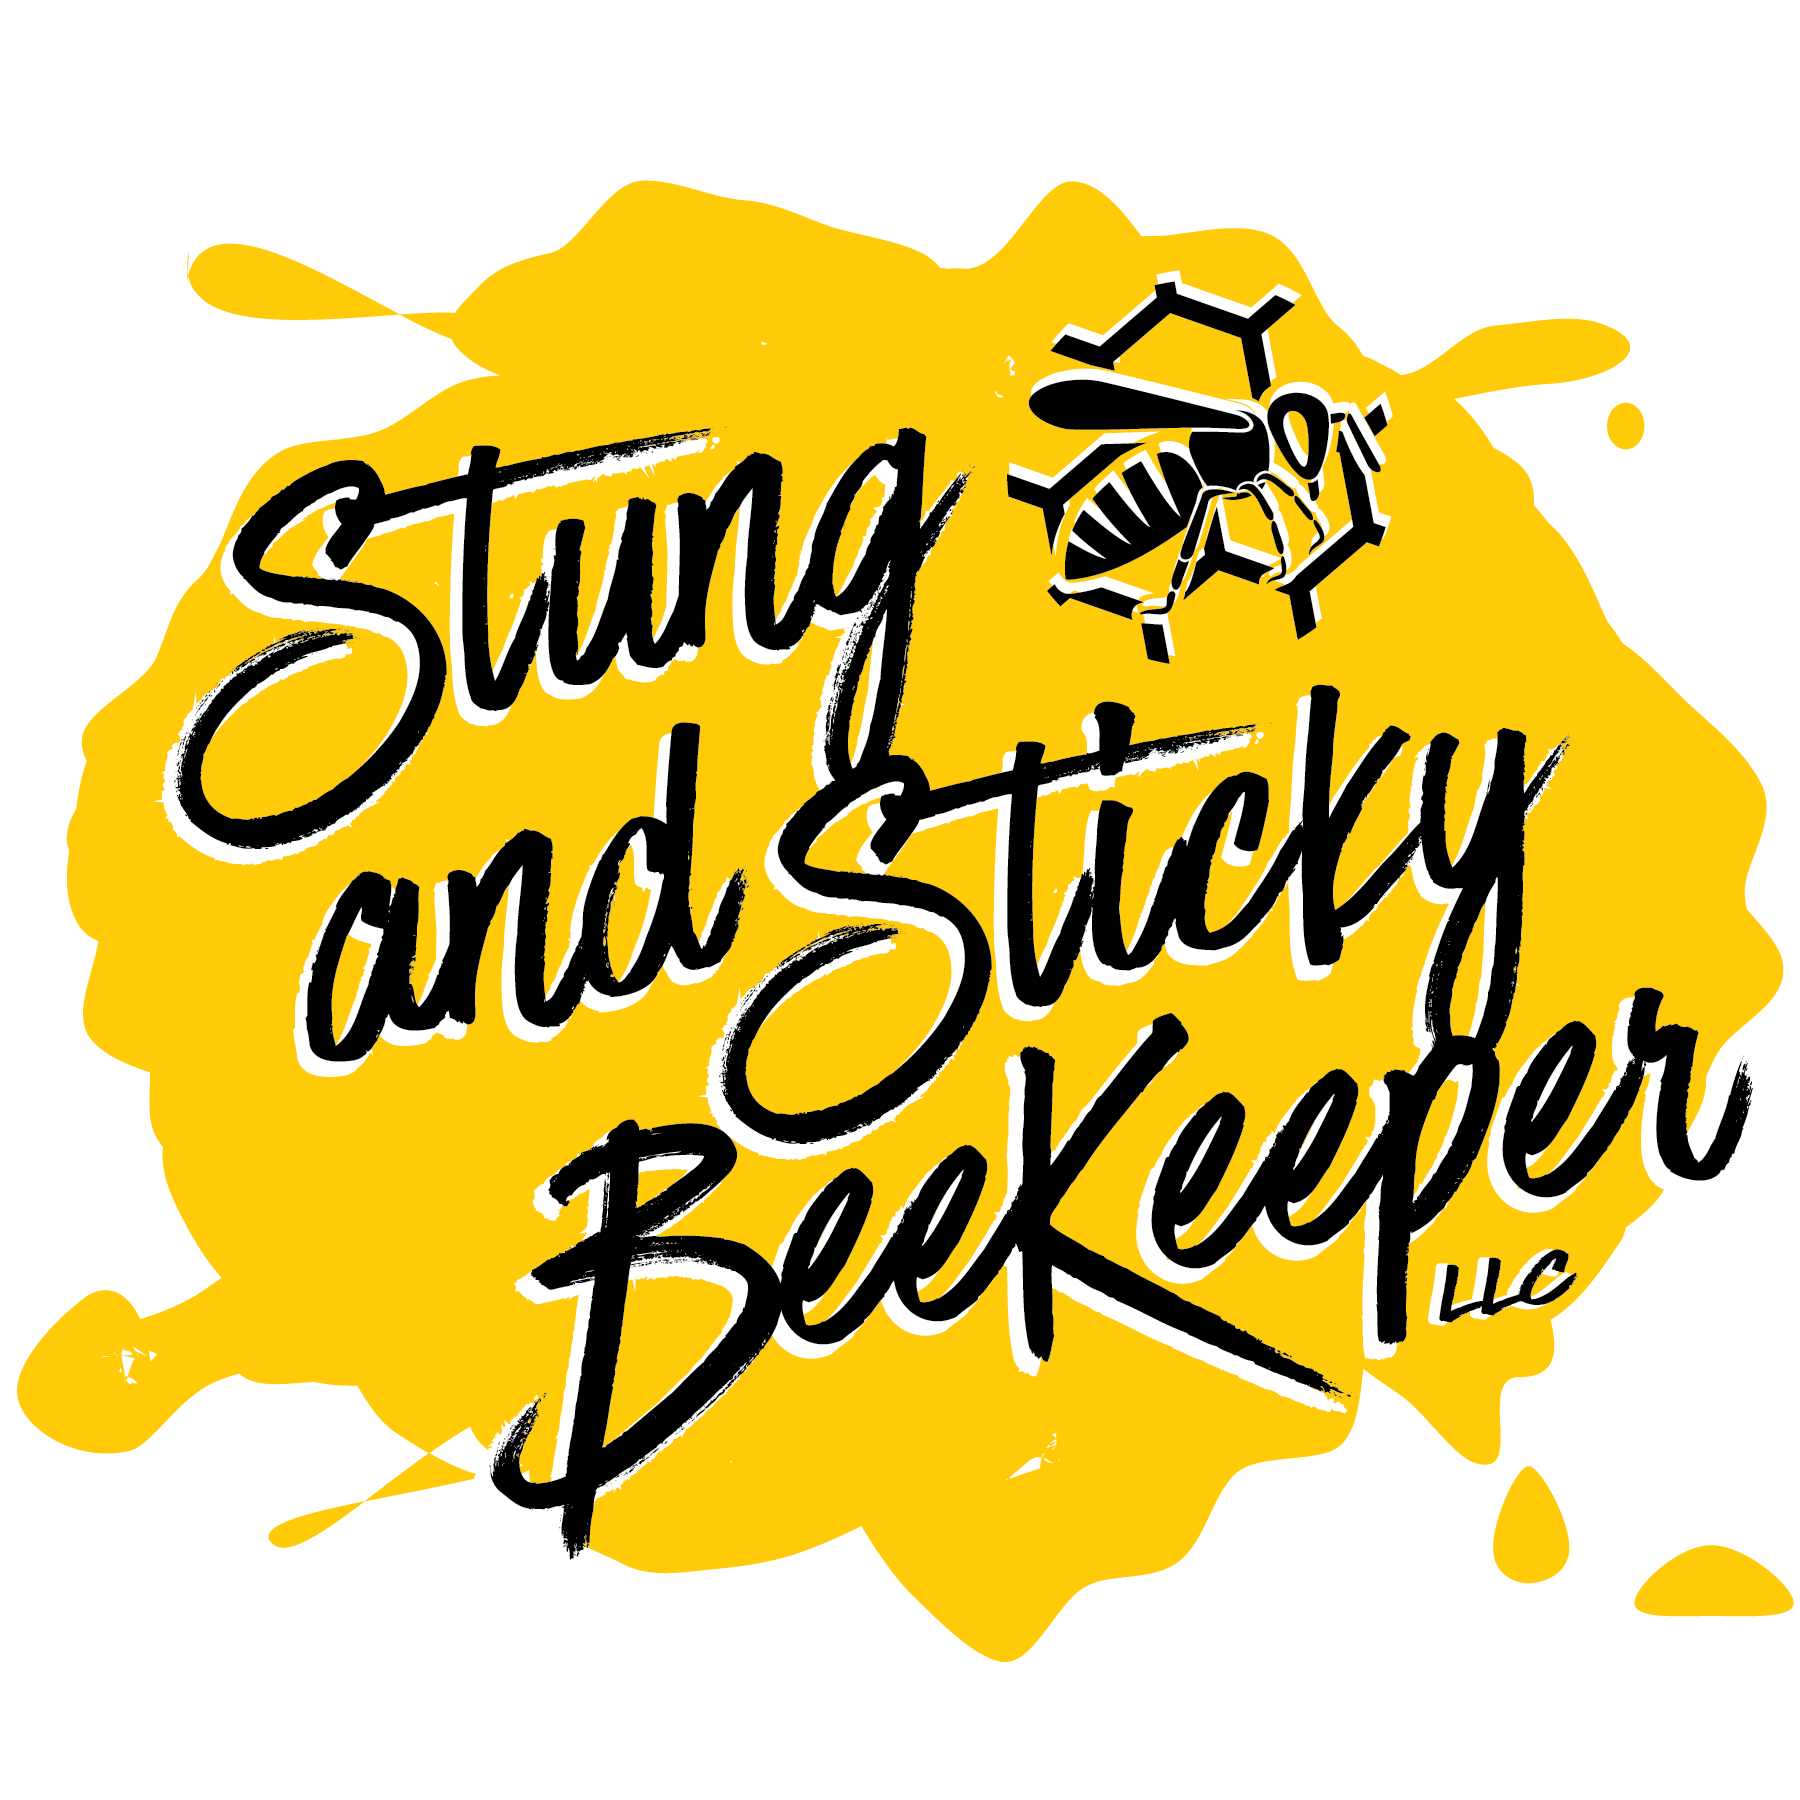 Live Bee Removal | Stung and Sticky Beekeeper